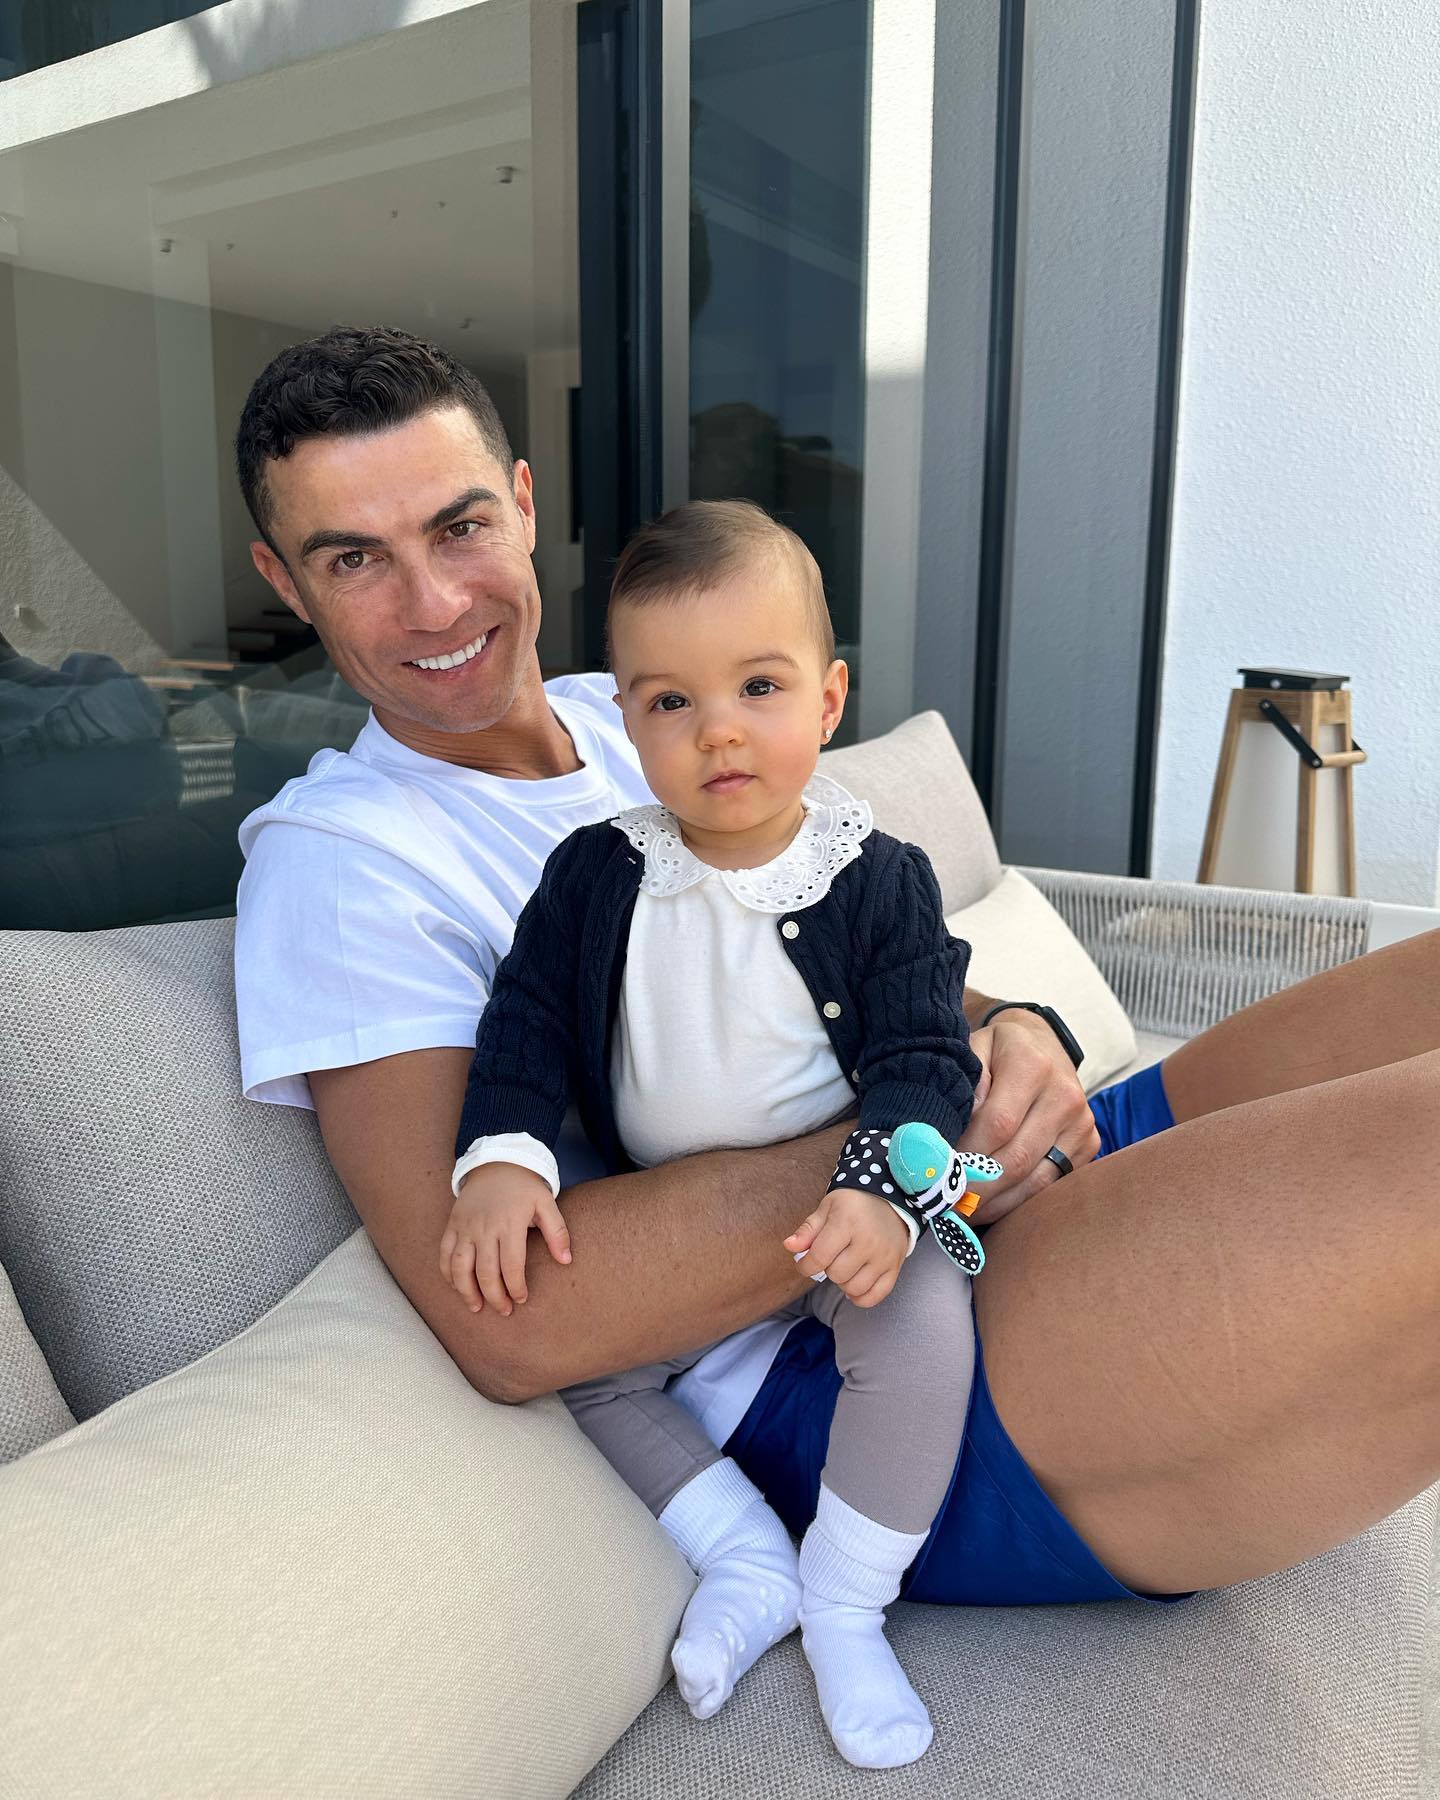 Georgina uploaded this adorable snap from their new home days after Ronaldo's four goal haul for Al-Nassr